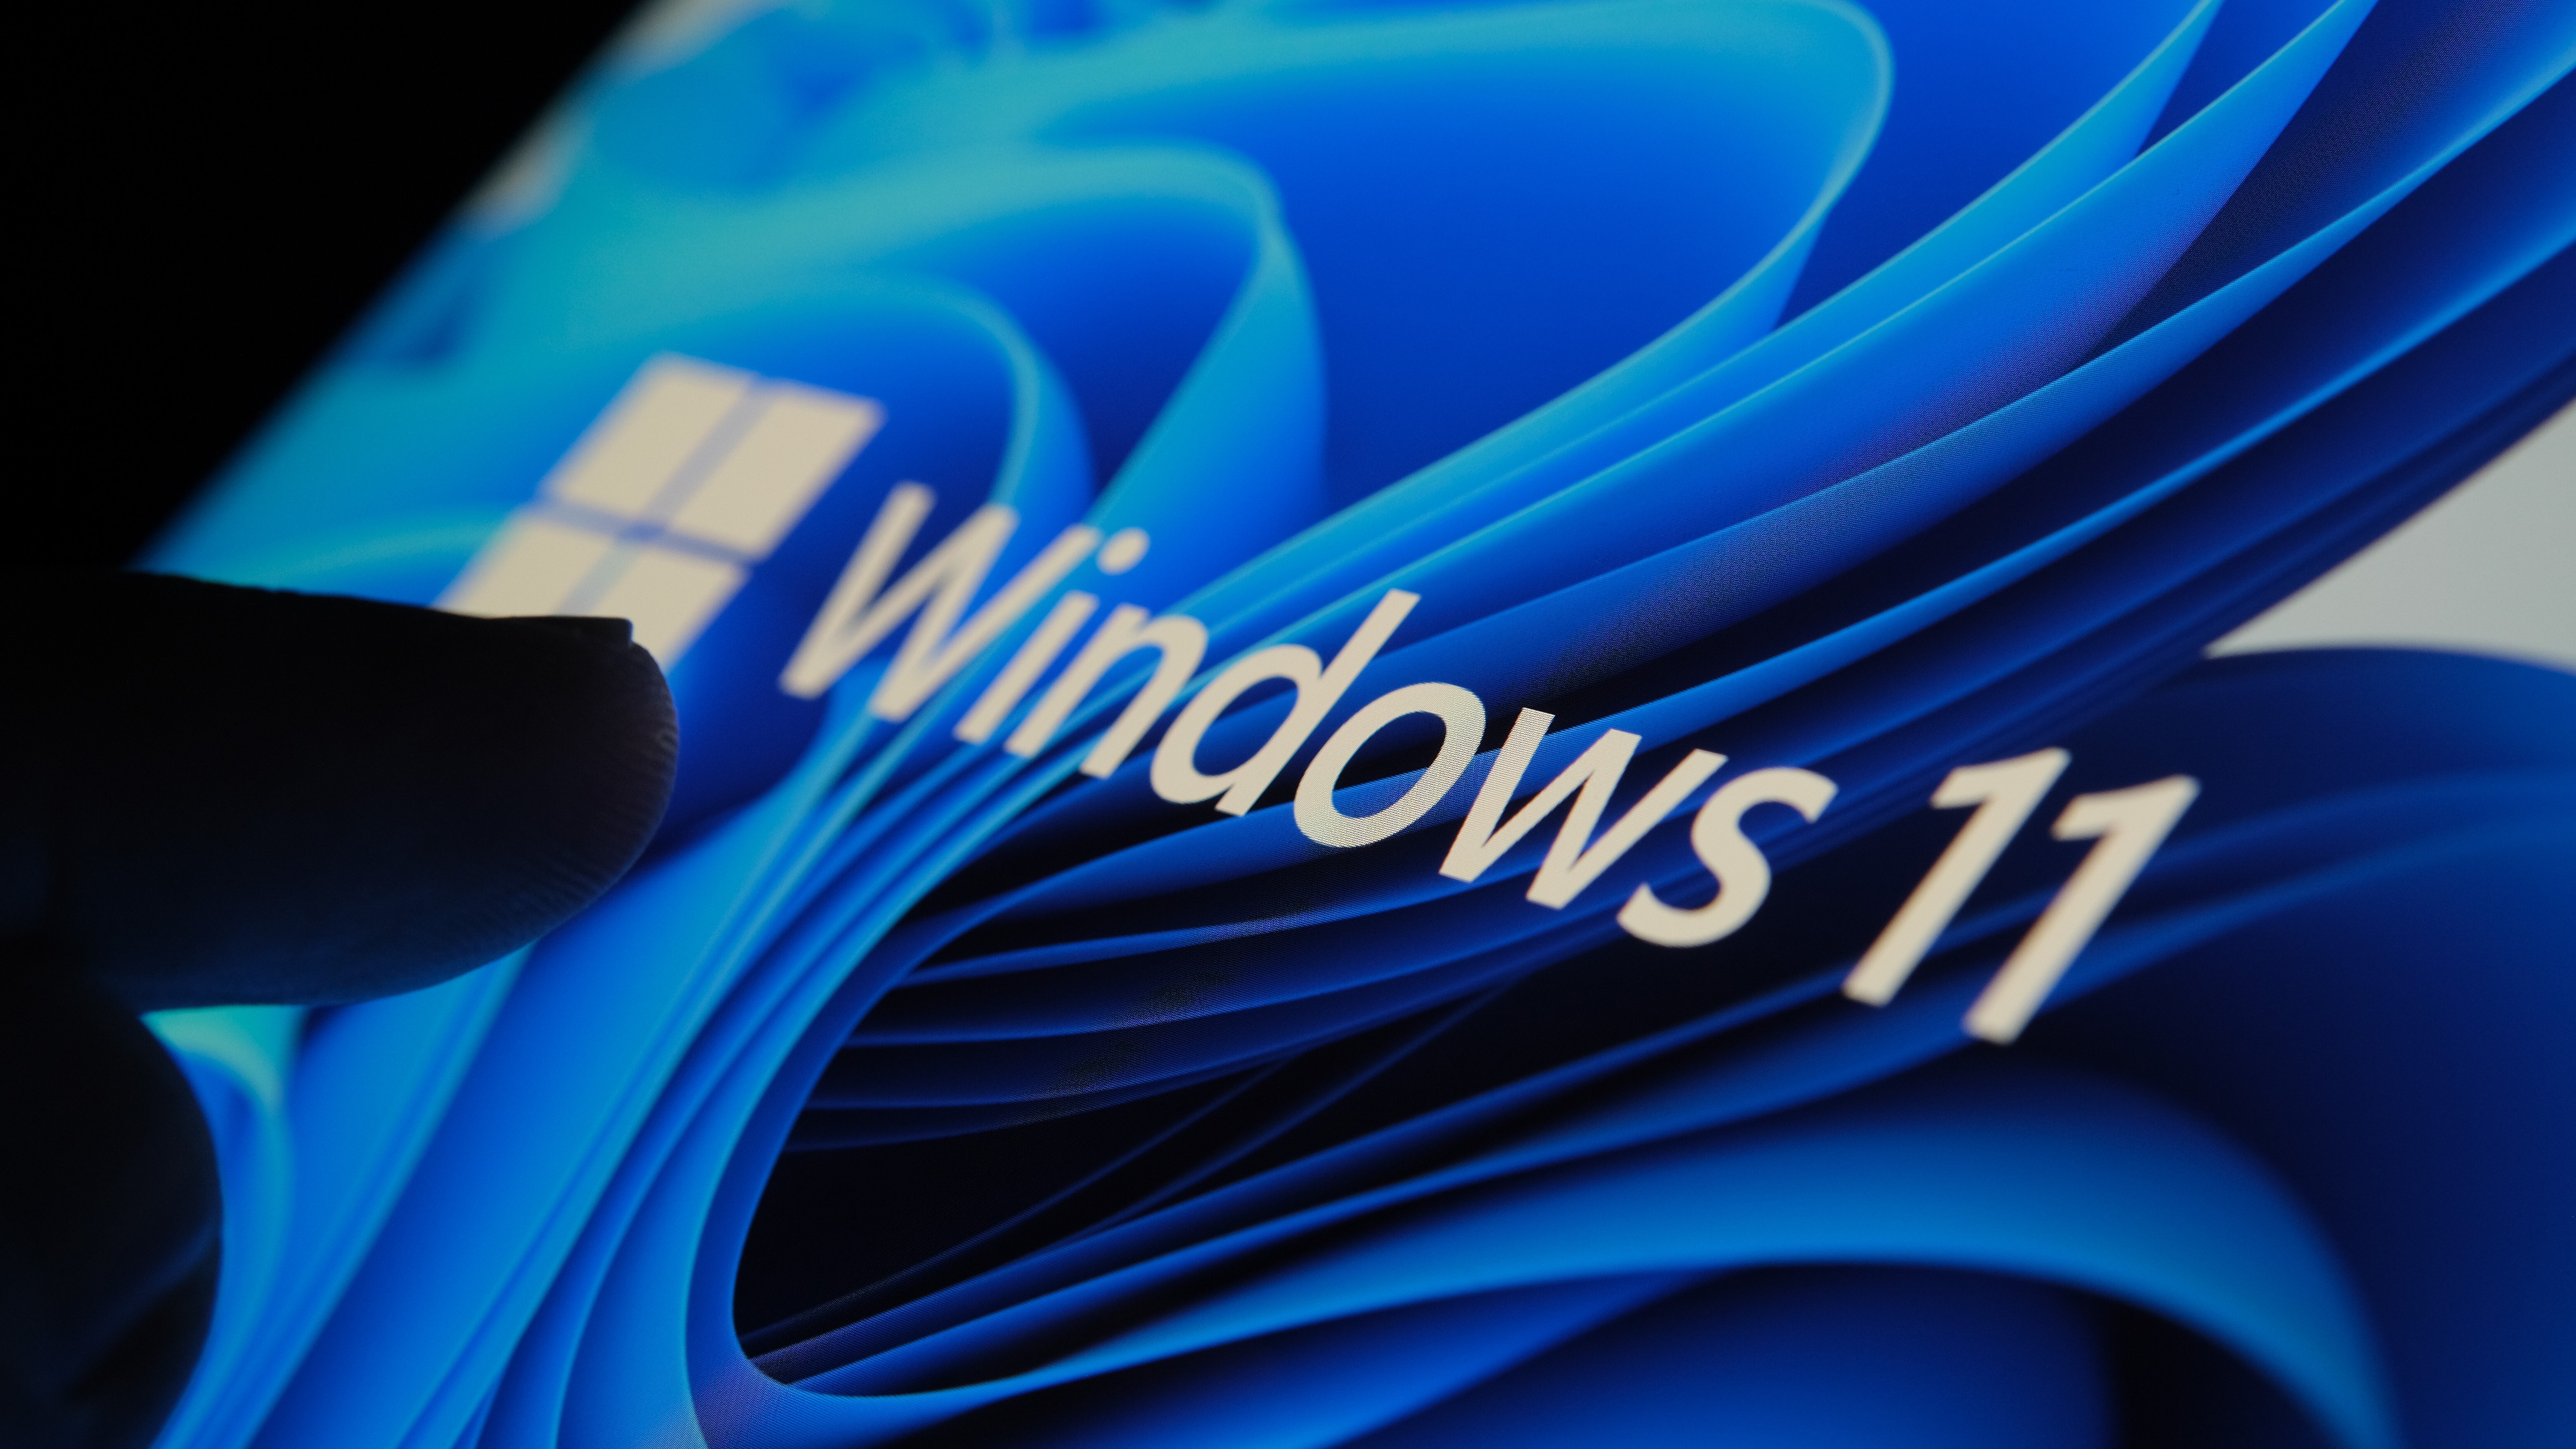 Windows 11 23H2 (2023 Update): Everything you need to know and how